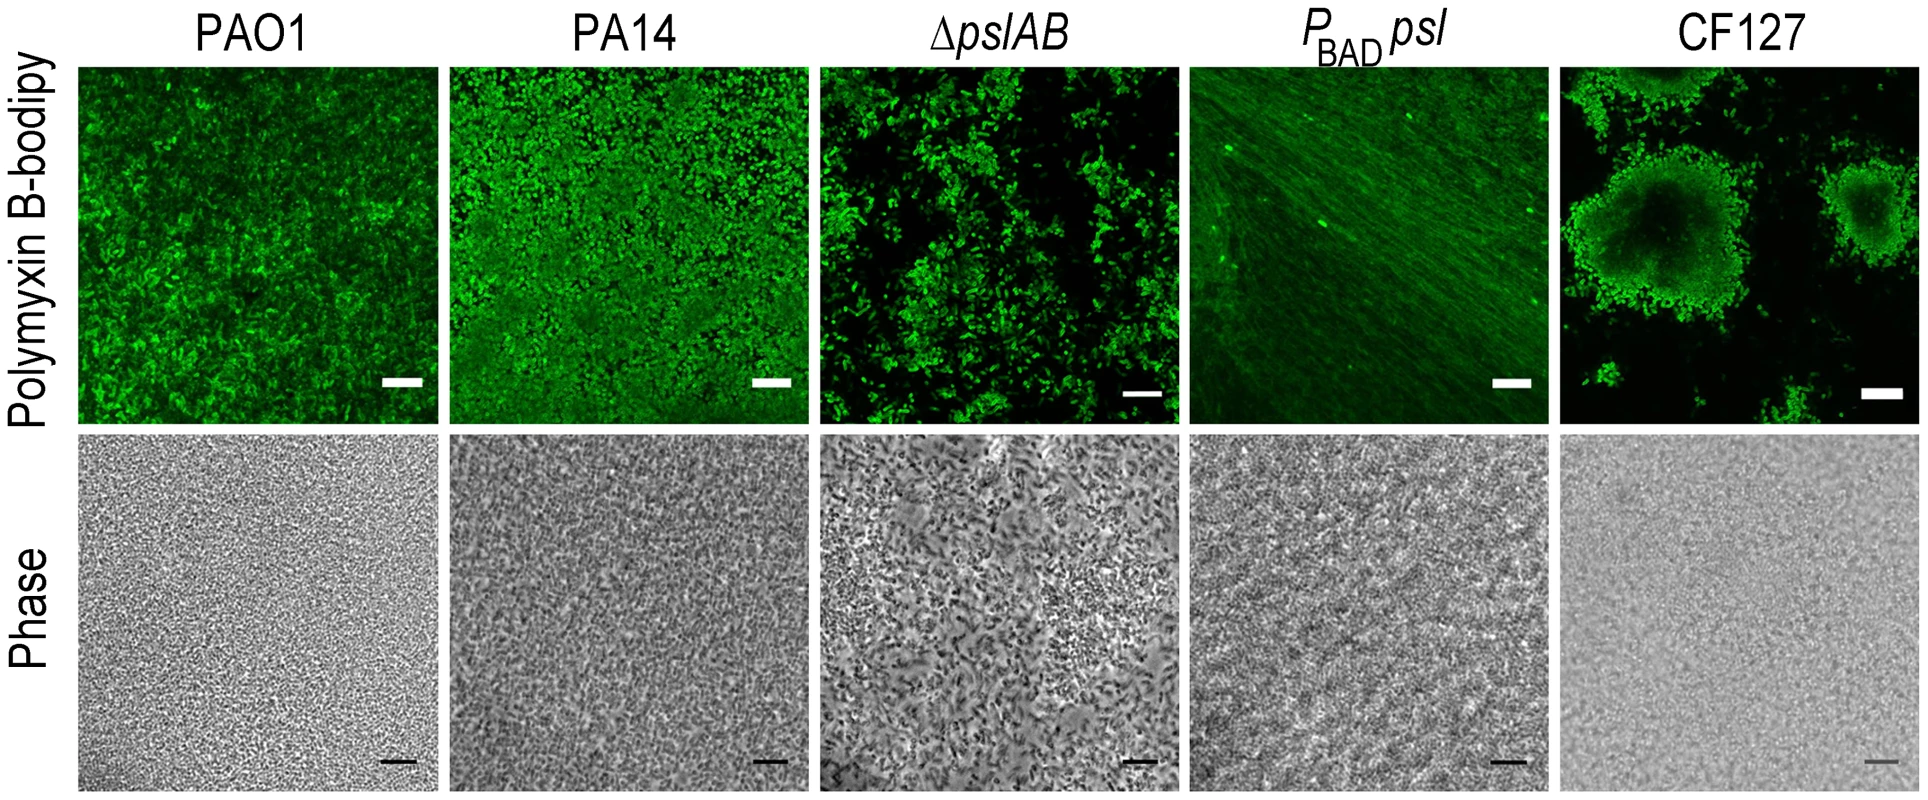 Polymyxin B interacts with the Psl extracellular matrix.